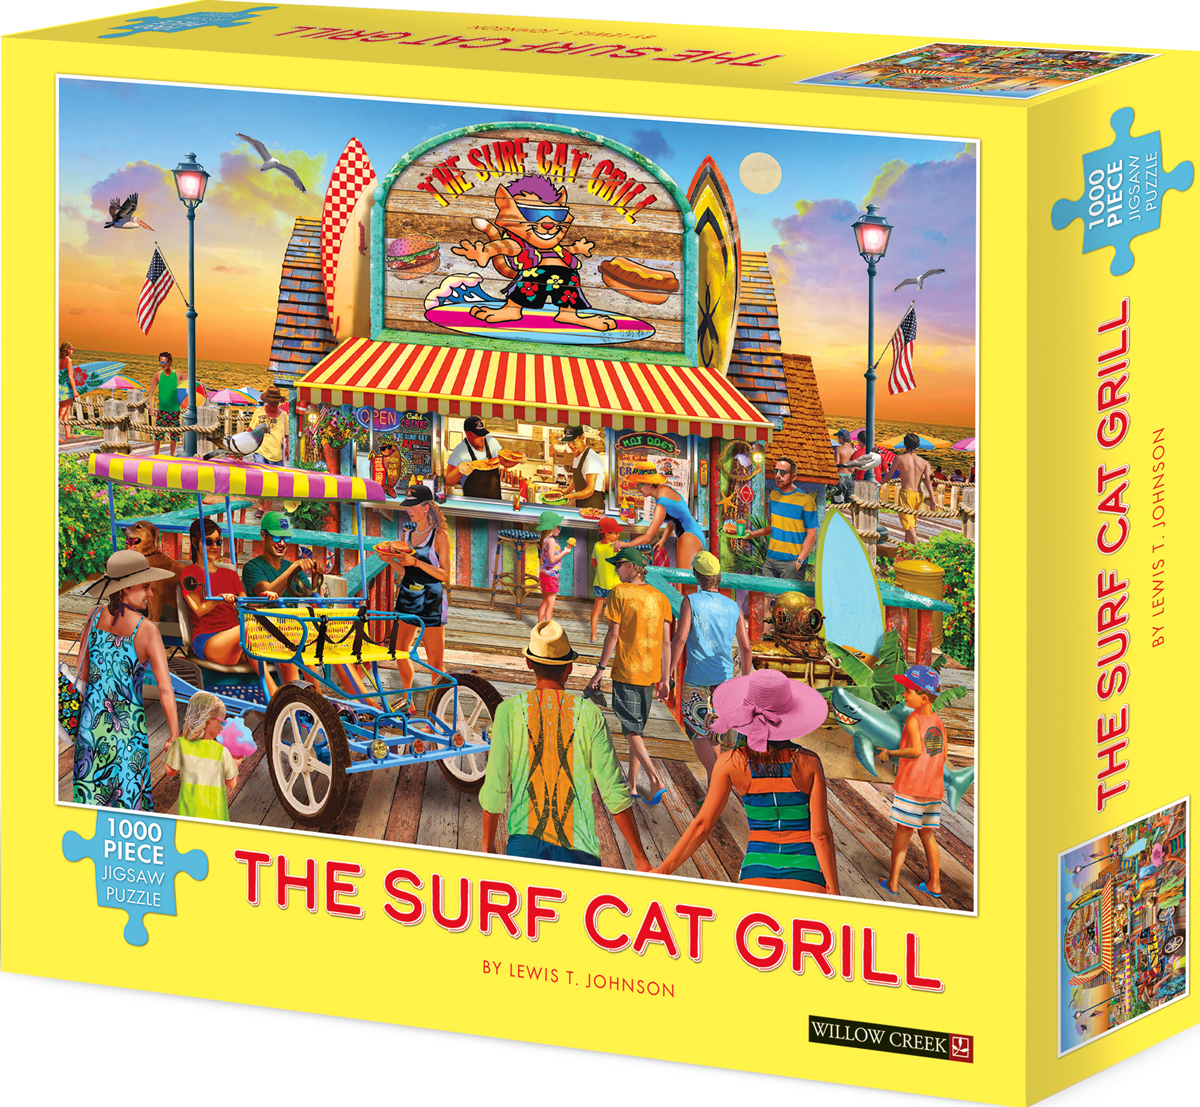 The Surf Cat Grill